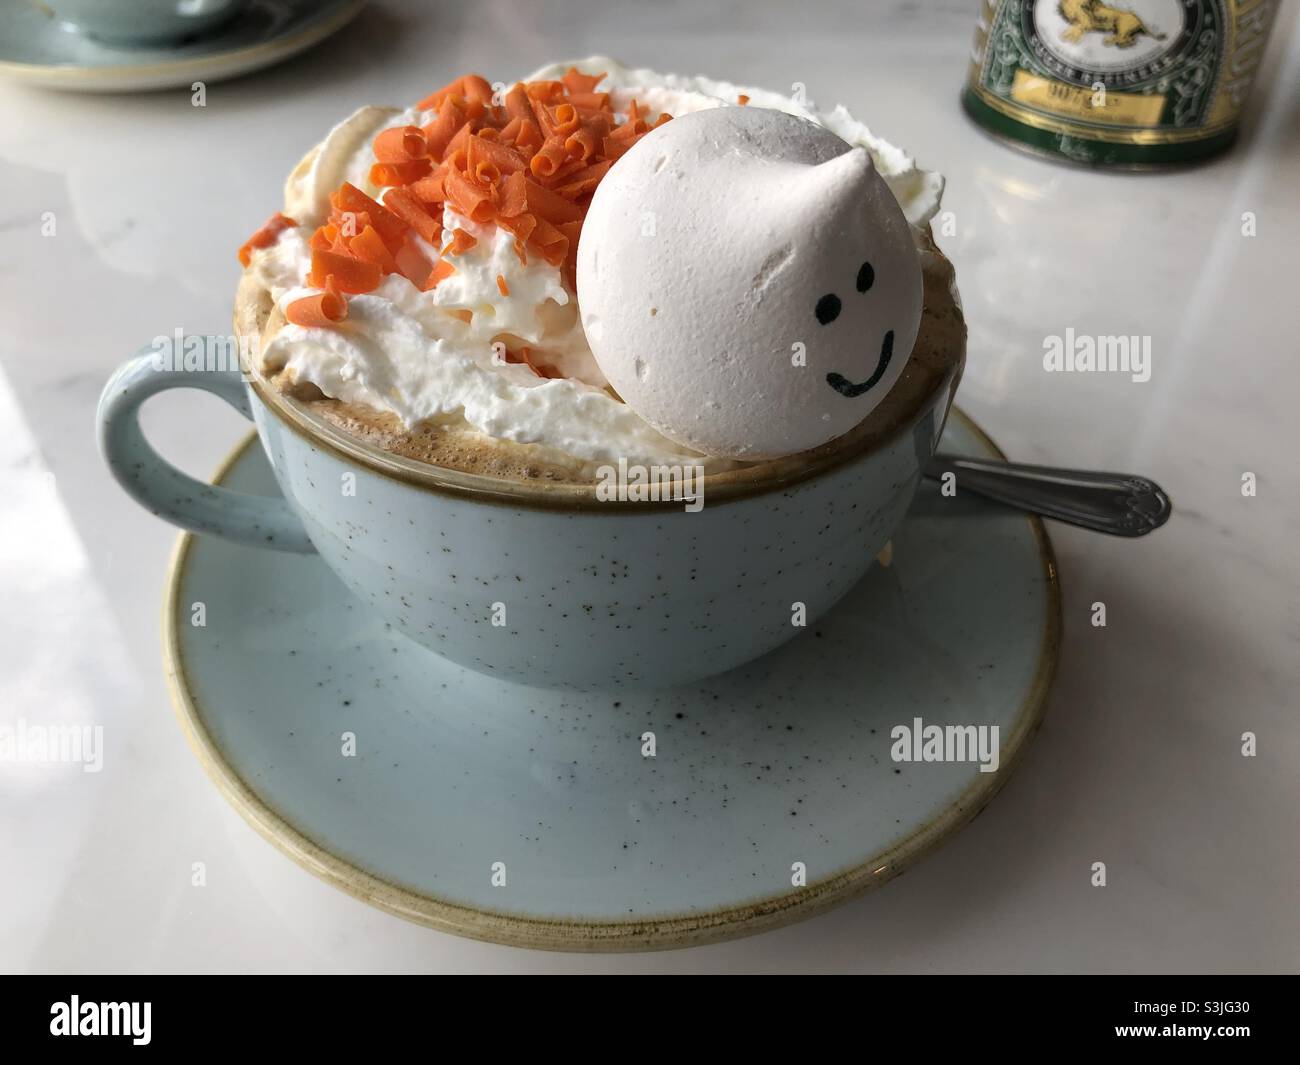 Pumpkin spice latte coffee with a “ghost” meringue in a cup and saucer Stock Photo